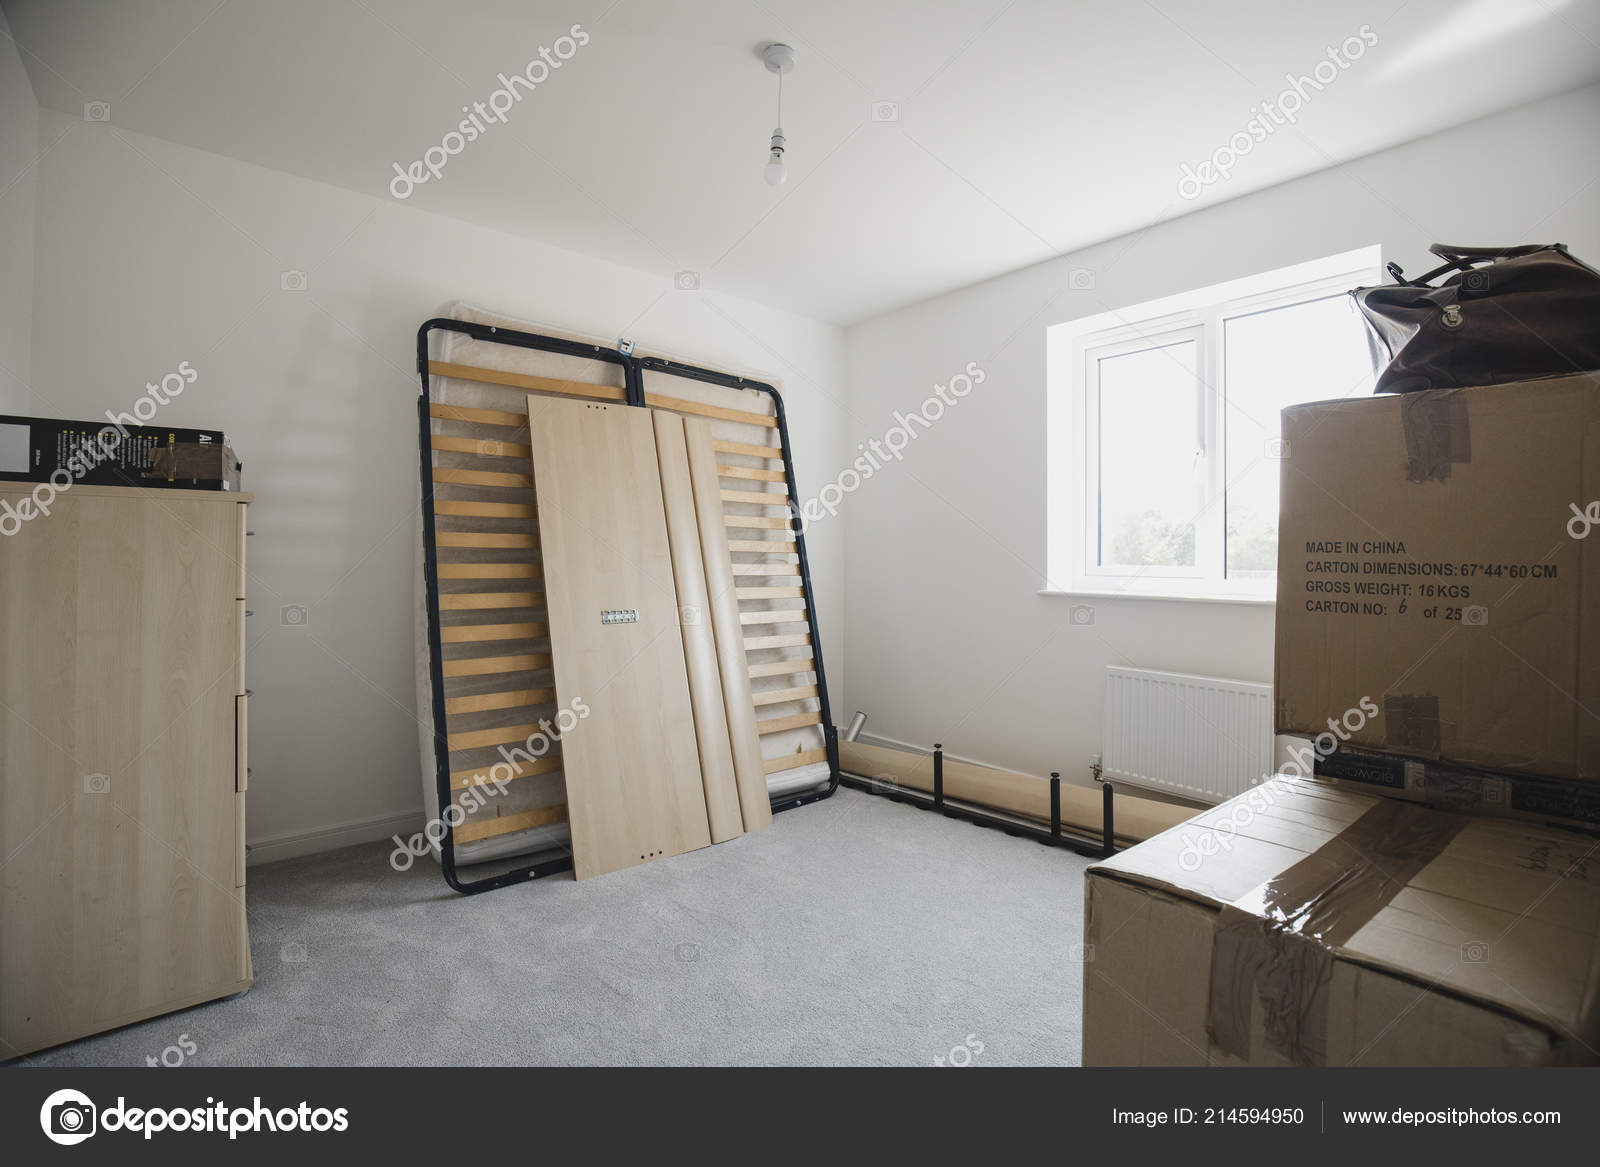 Bedroom New Home Flatpack Furniture Cardboard Boxes Stock Photo